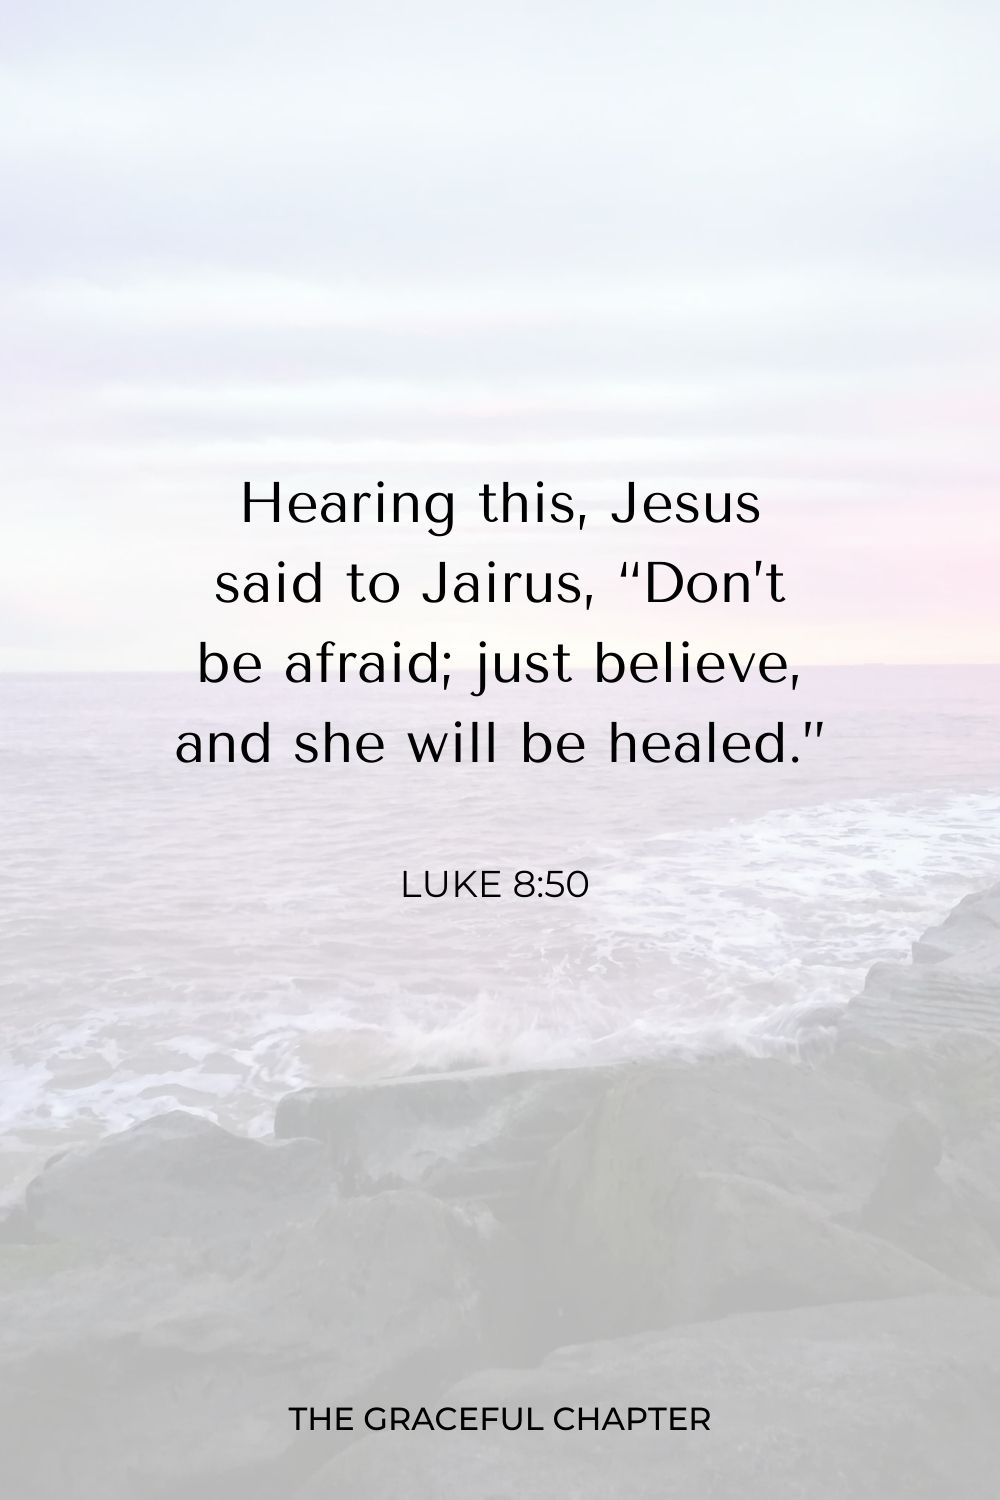 Hearing this, Jesus said to Jairus, “Don’t be afraid; just believe, and she will be healed.” Luke 8:50